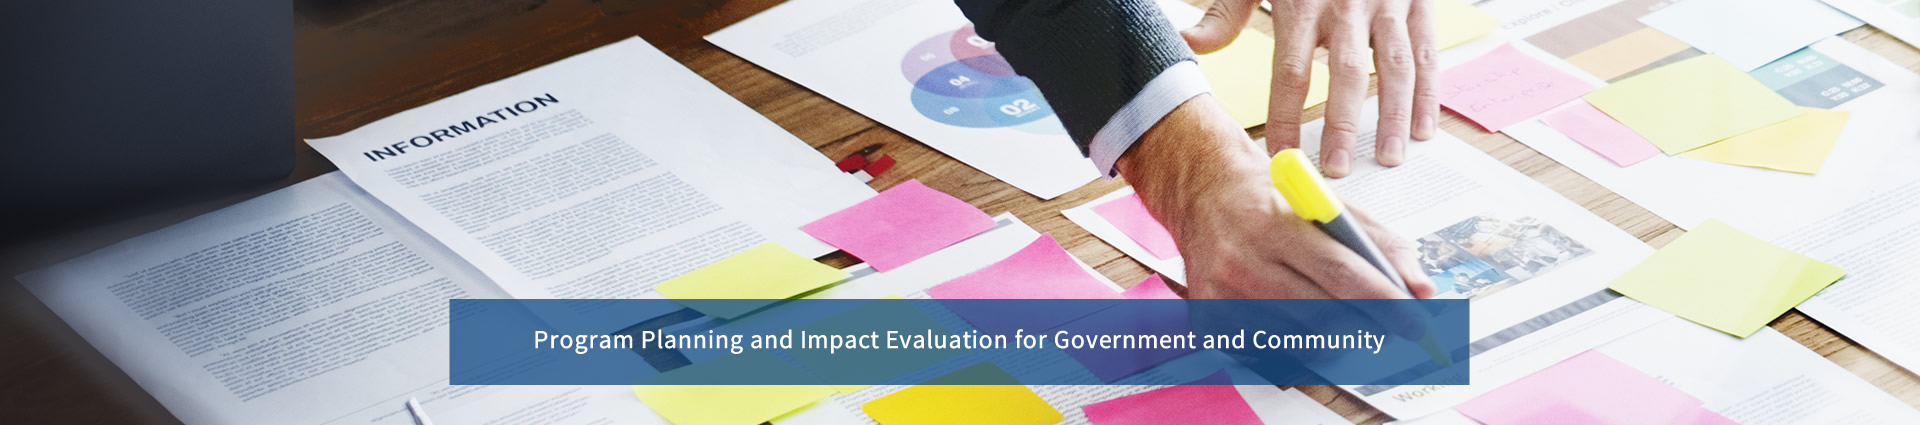 program planning and impact evaluation for government and community